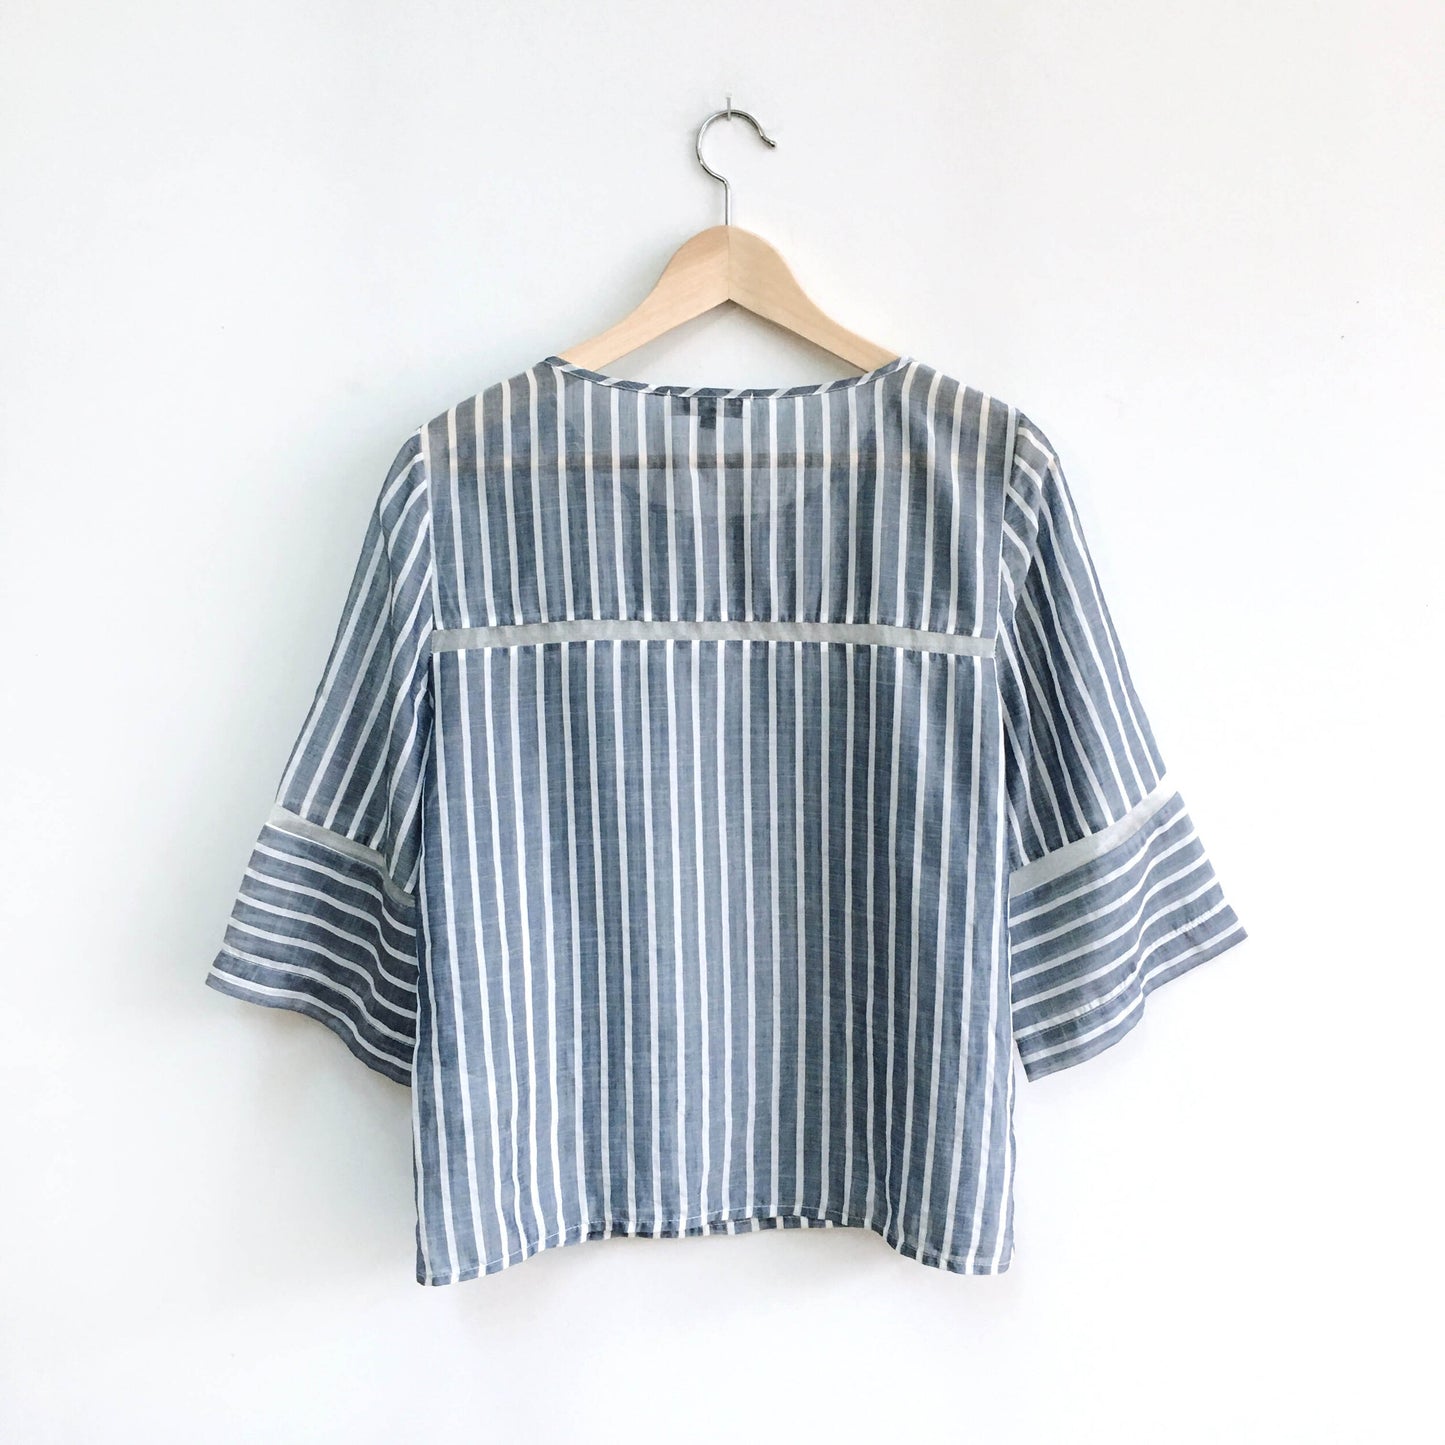 Waverly Grey Sheer Striped Blouse - size 6